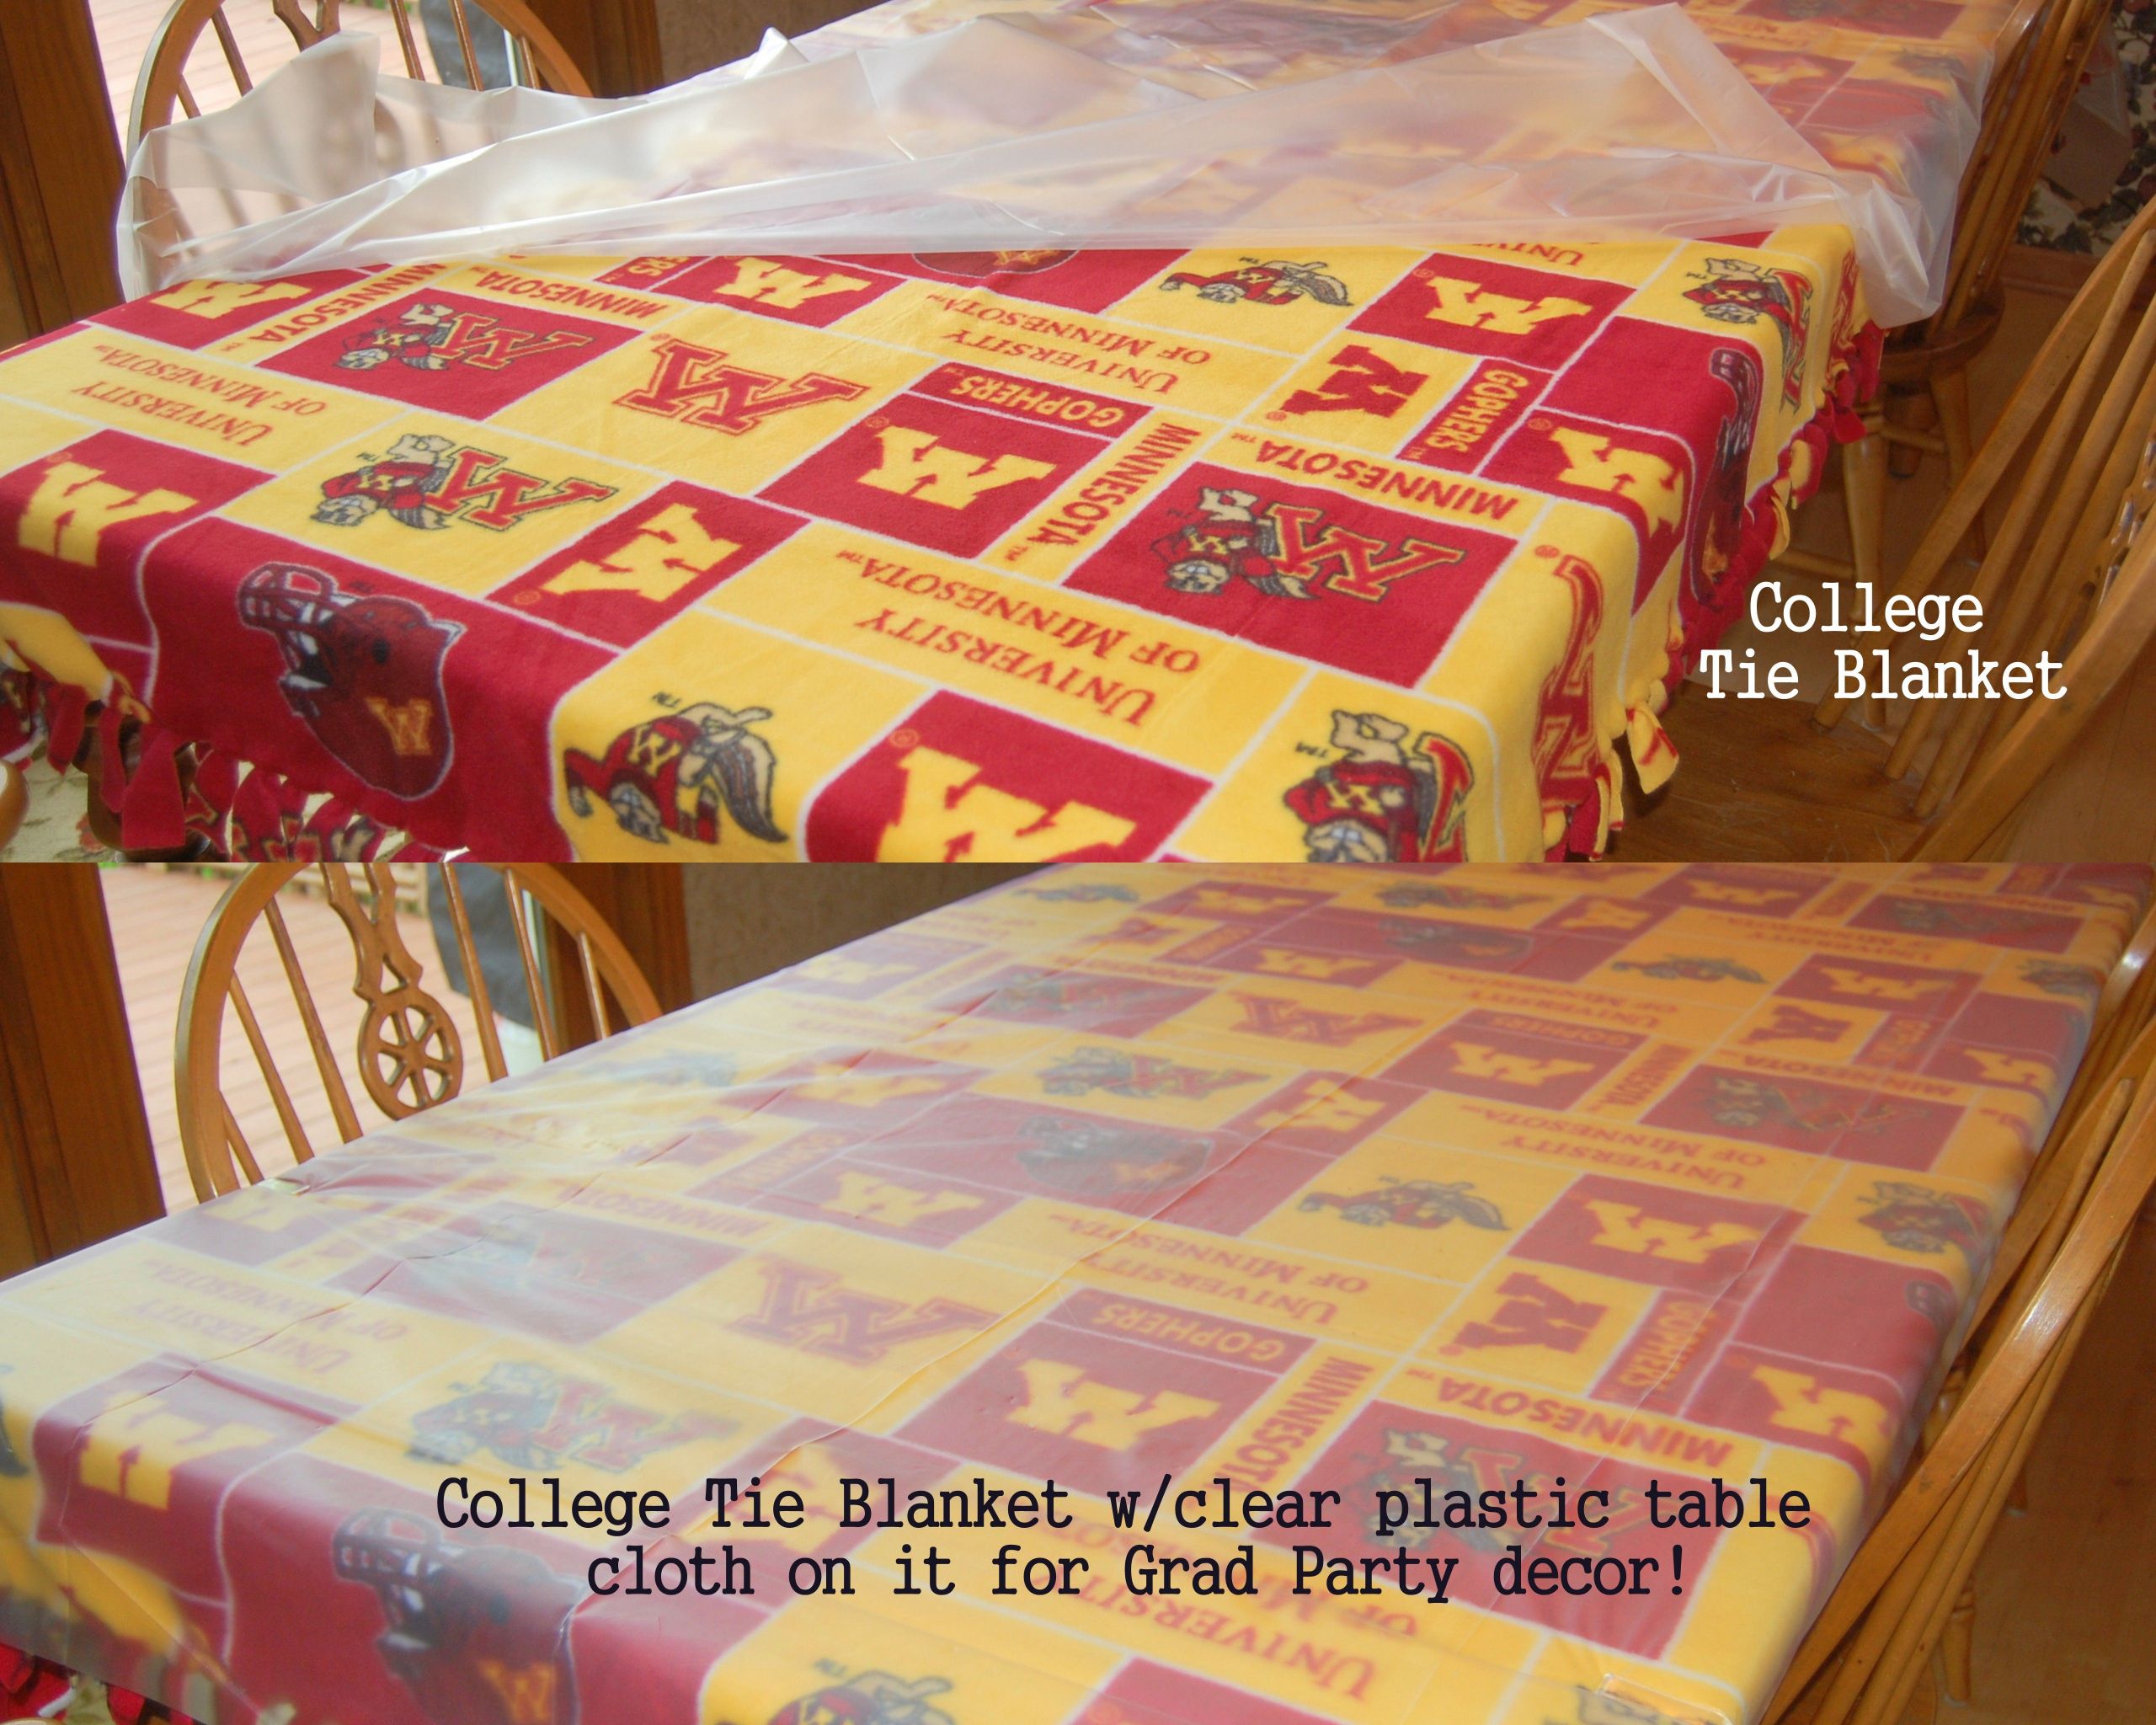 Tablecloth Ideas For Graduation Party
 Grad Party Tablecloth made with fleece college tie blanket